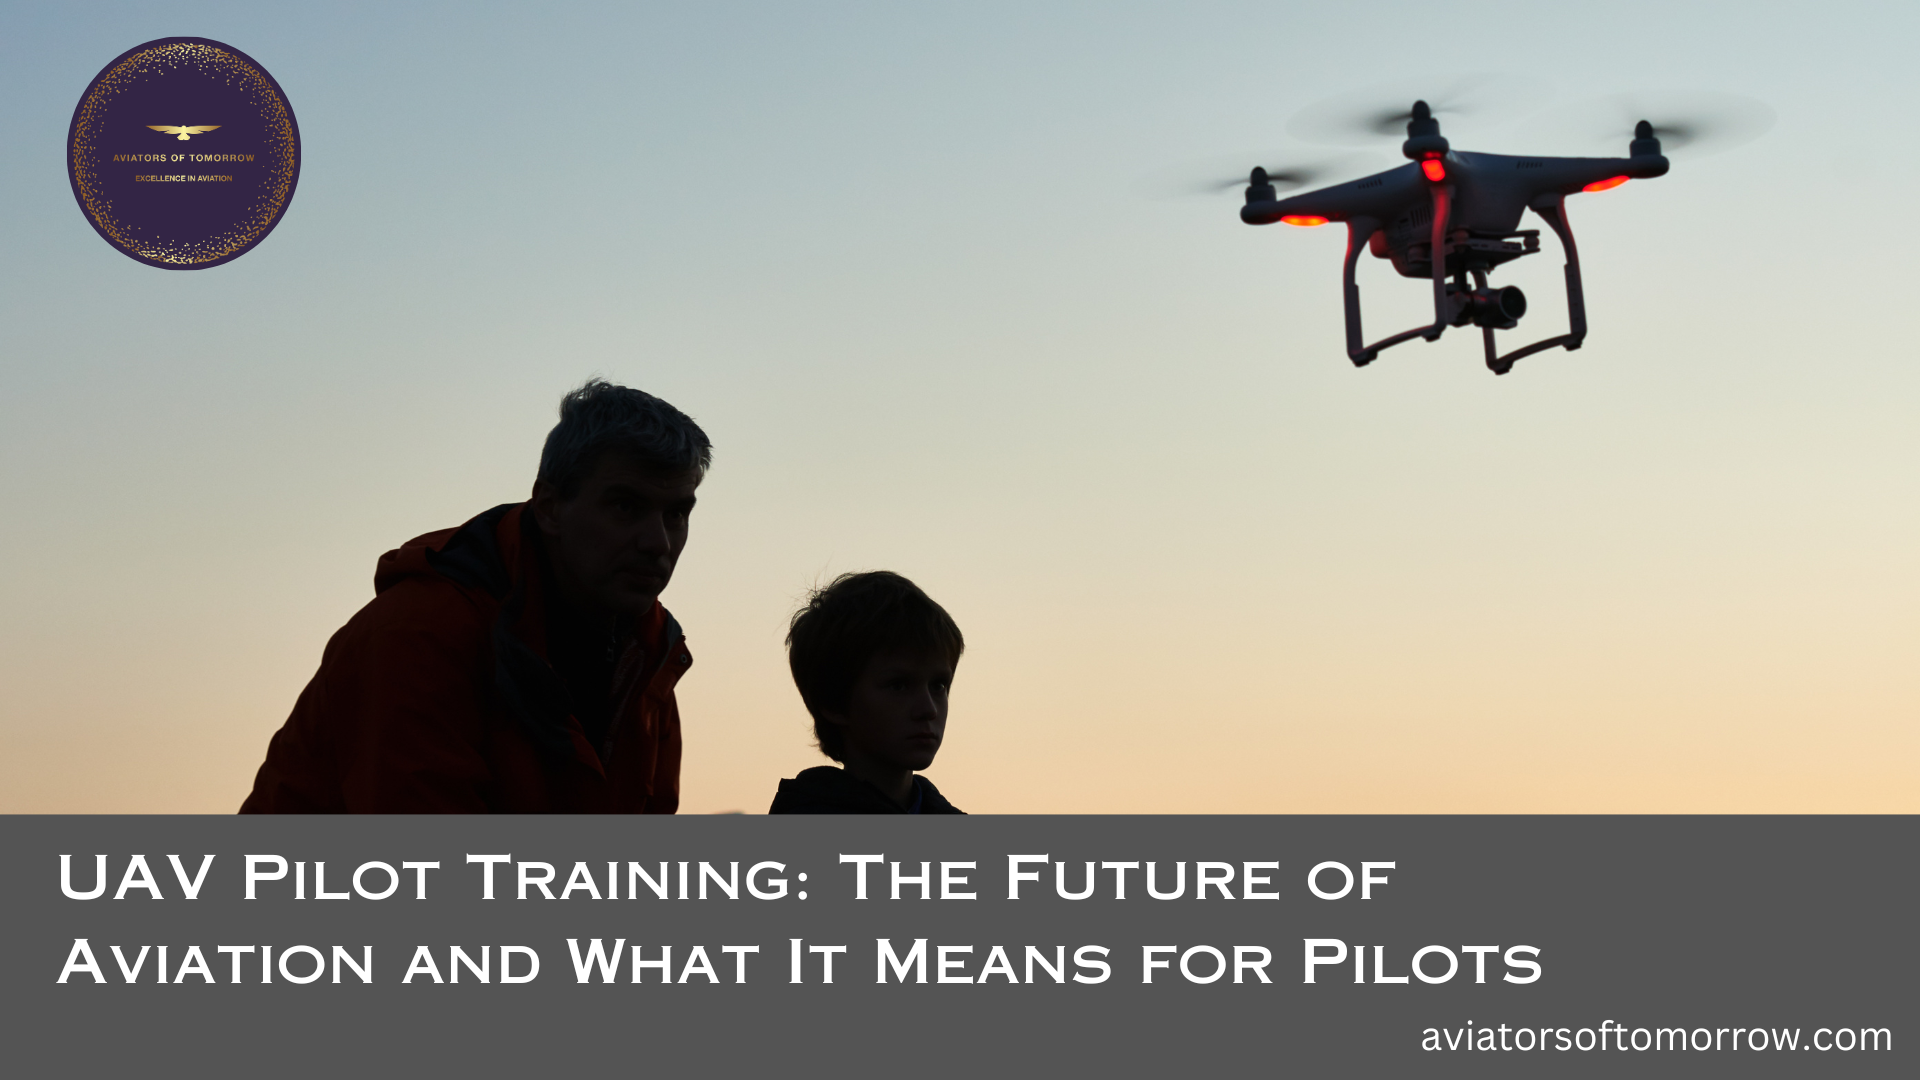 UAV Pilot Training: The Future of Aviation and What It Means for Pilots